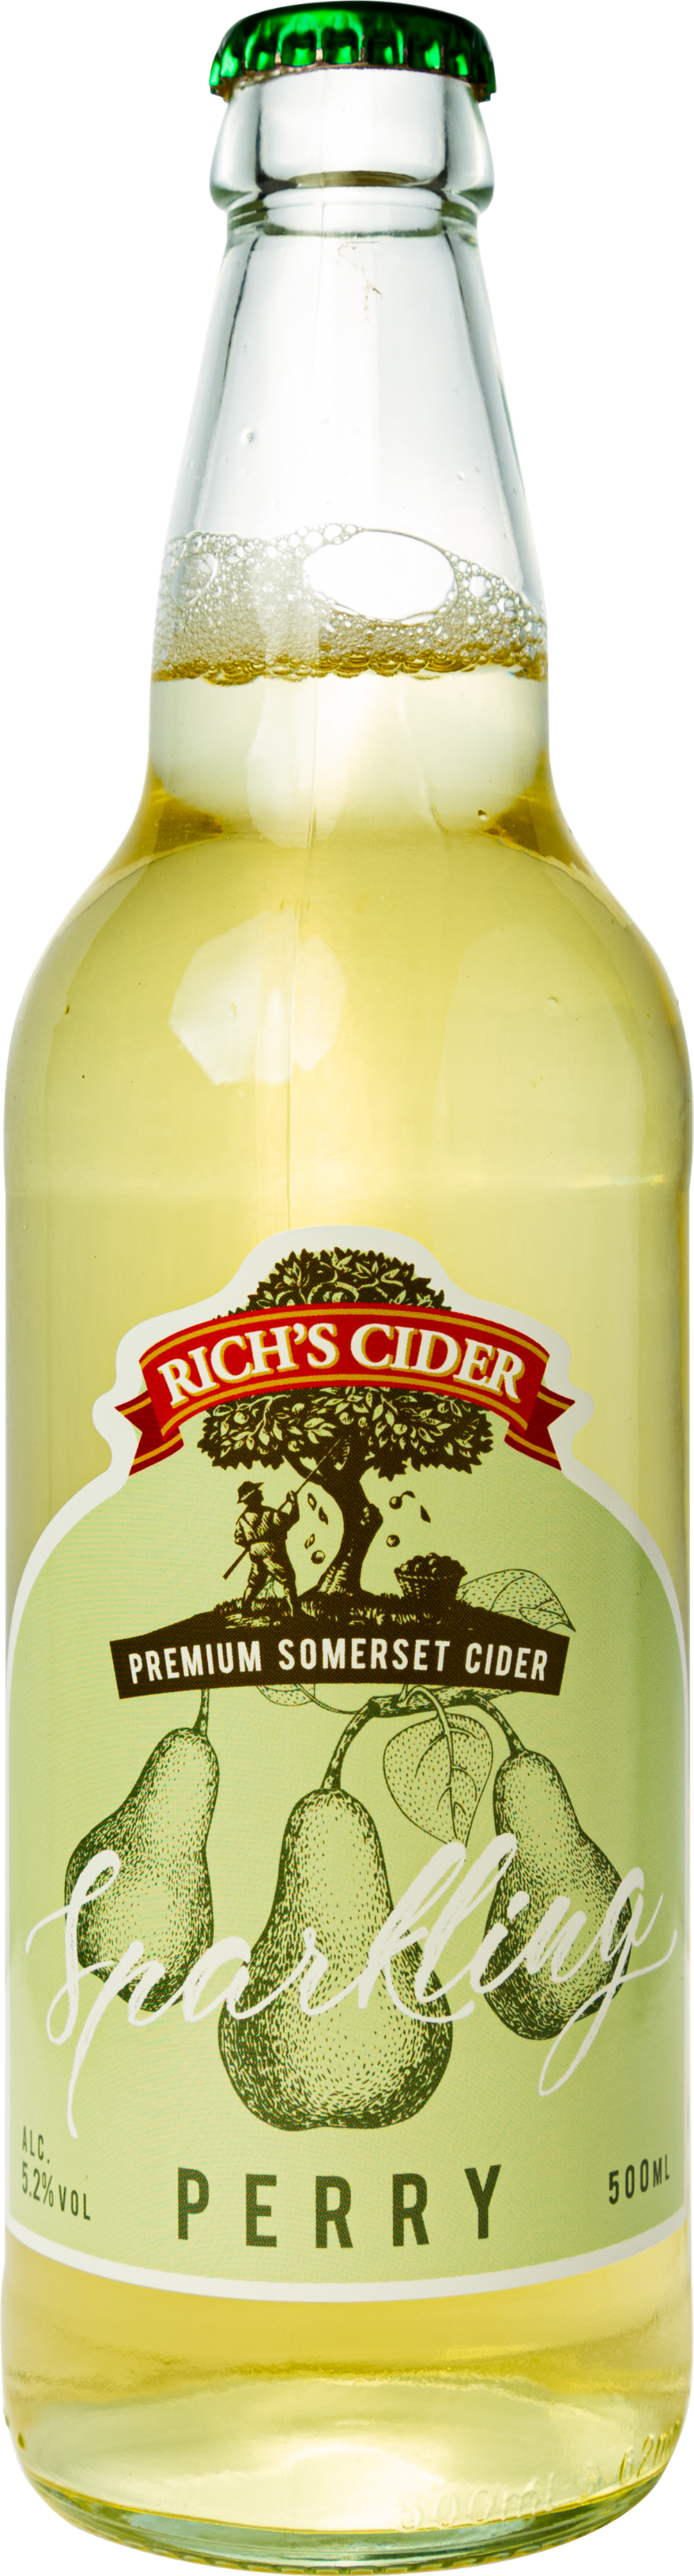 RICH'S CIDER Sparkling Perry 5.2% ABV 500ml